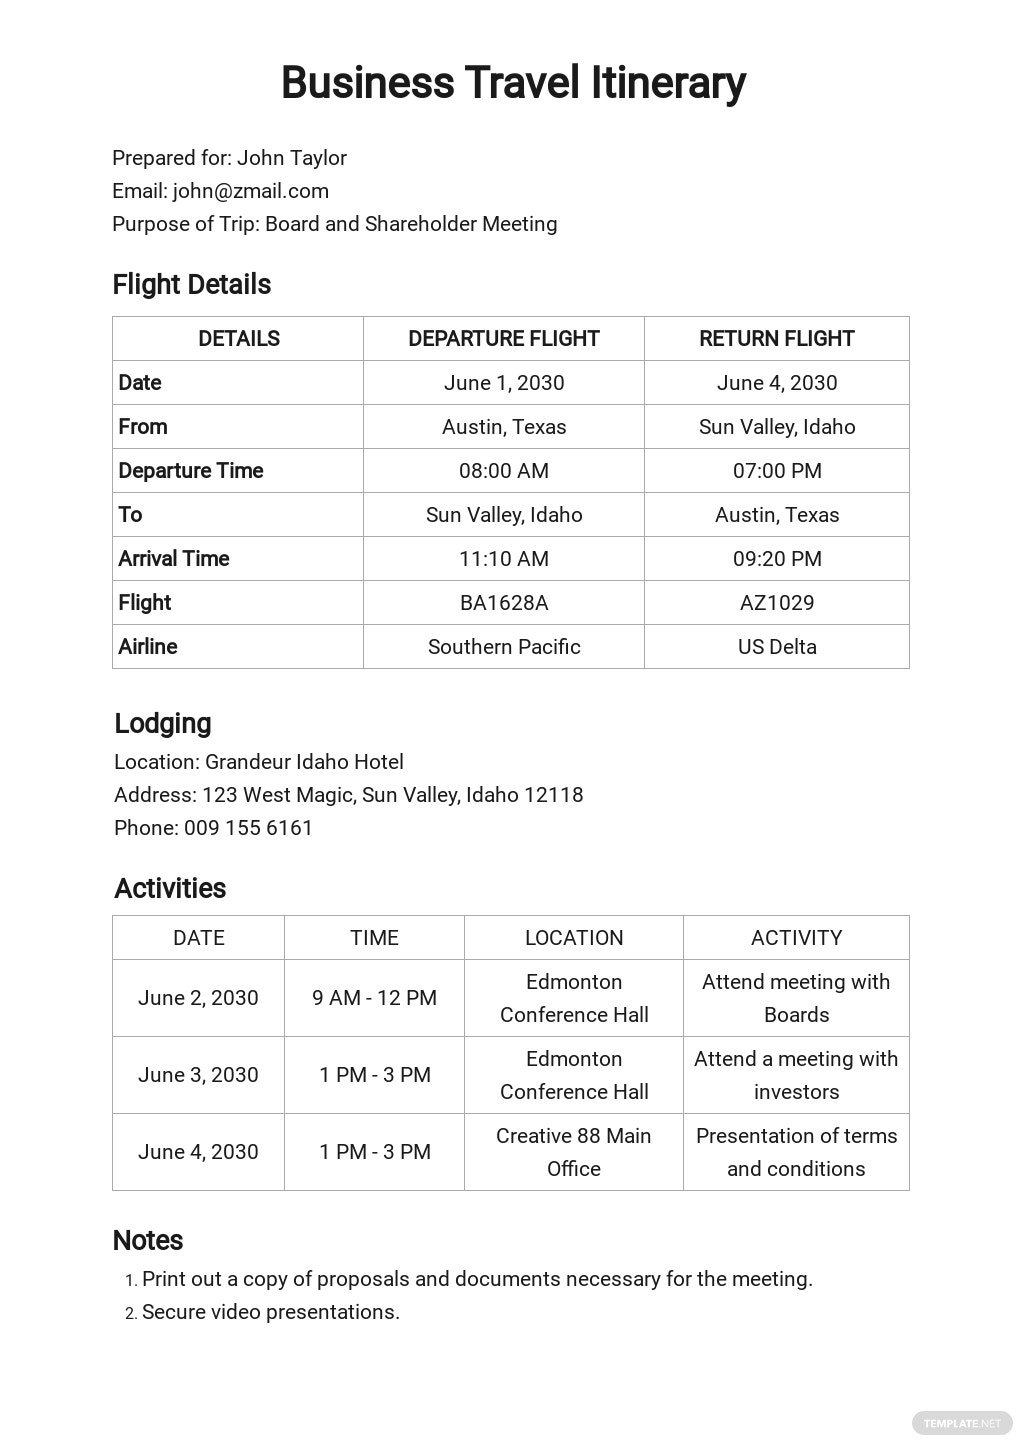 wordfree-business-travel-itinerary-with-meeting-schedule-template